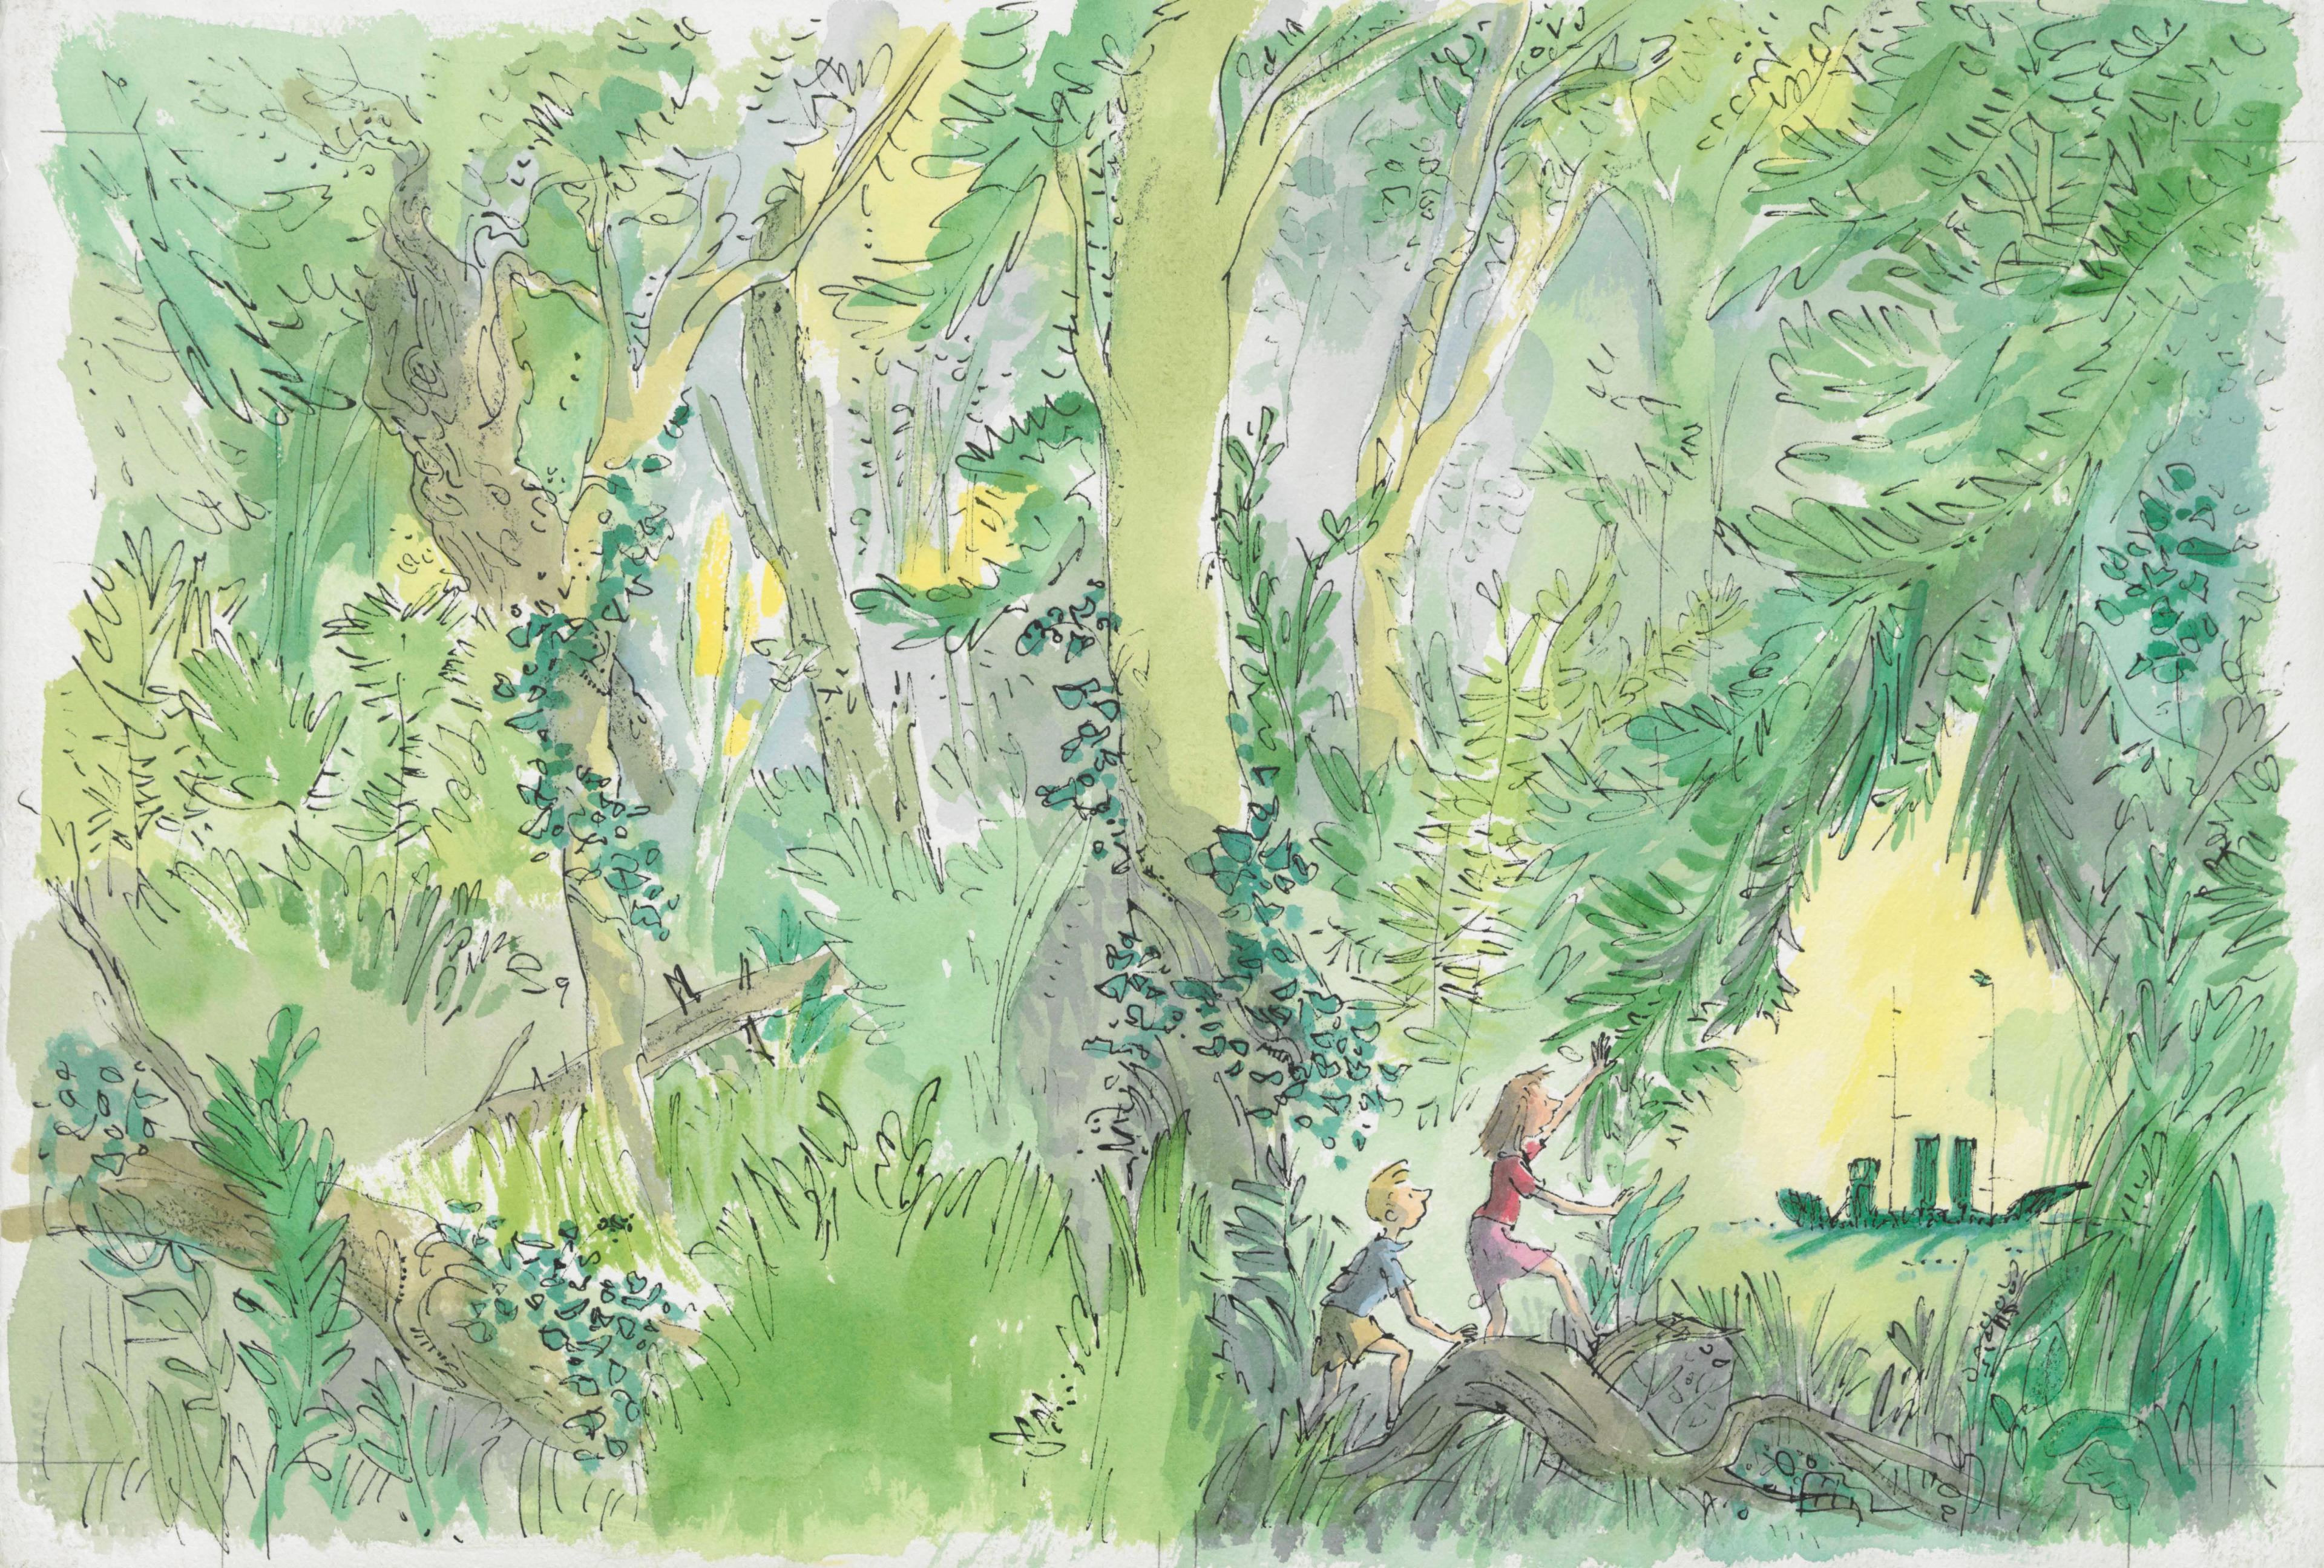 Illustration of a busy landscape full of trees, bushes, leaves, and vines, with two children standing on a tree trunk to the left of a circular opening in the vegetation. The child on the right is holding back some branches and they are both looking into the opening where you can see in the distance is a silhouette of a green ship.